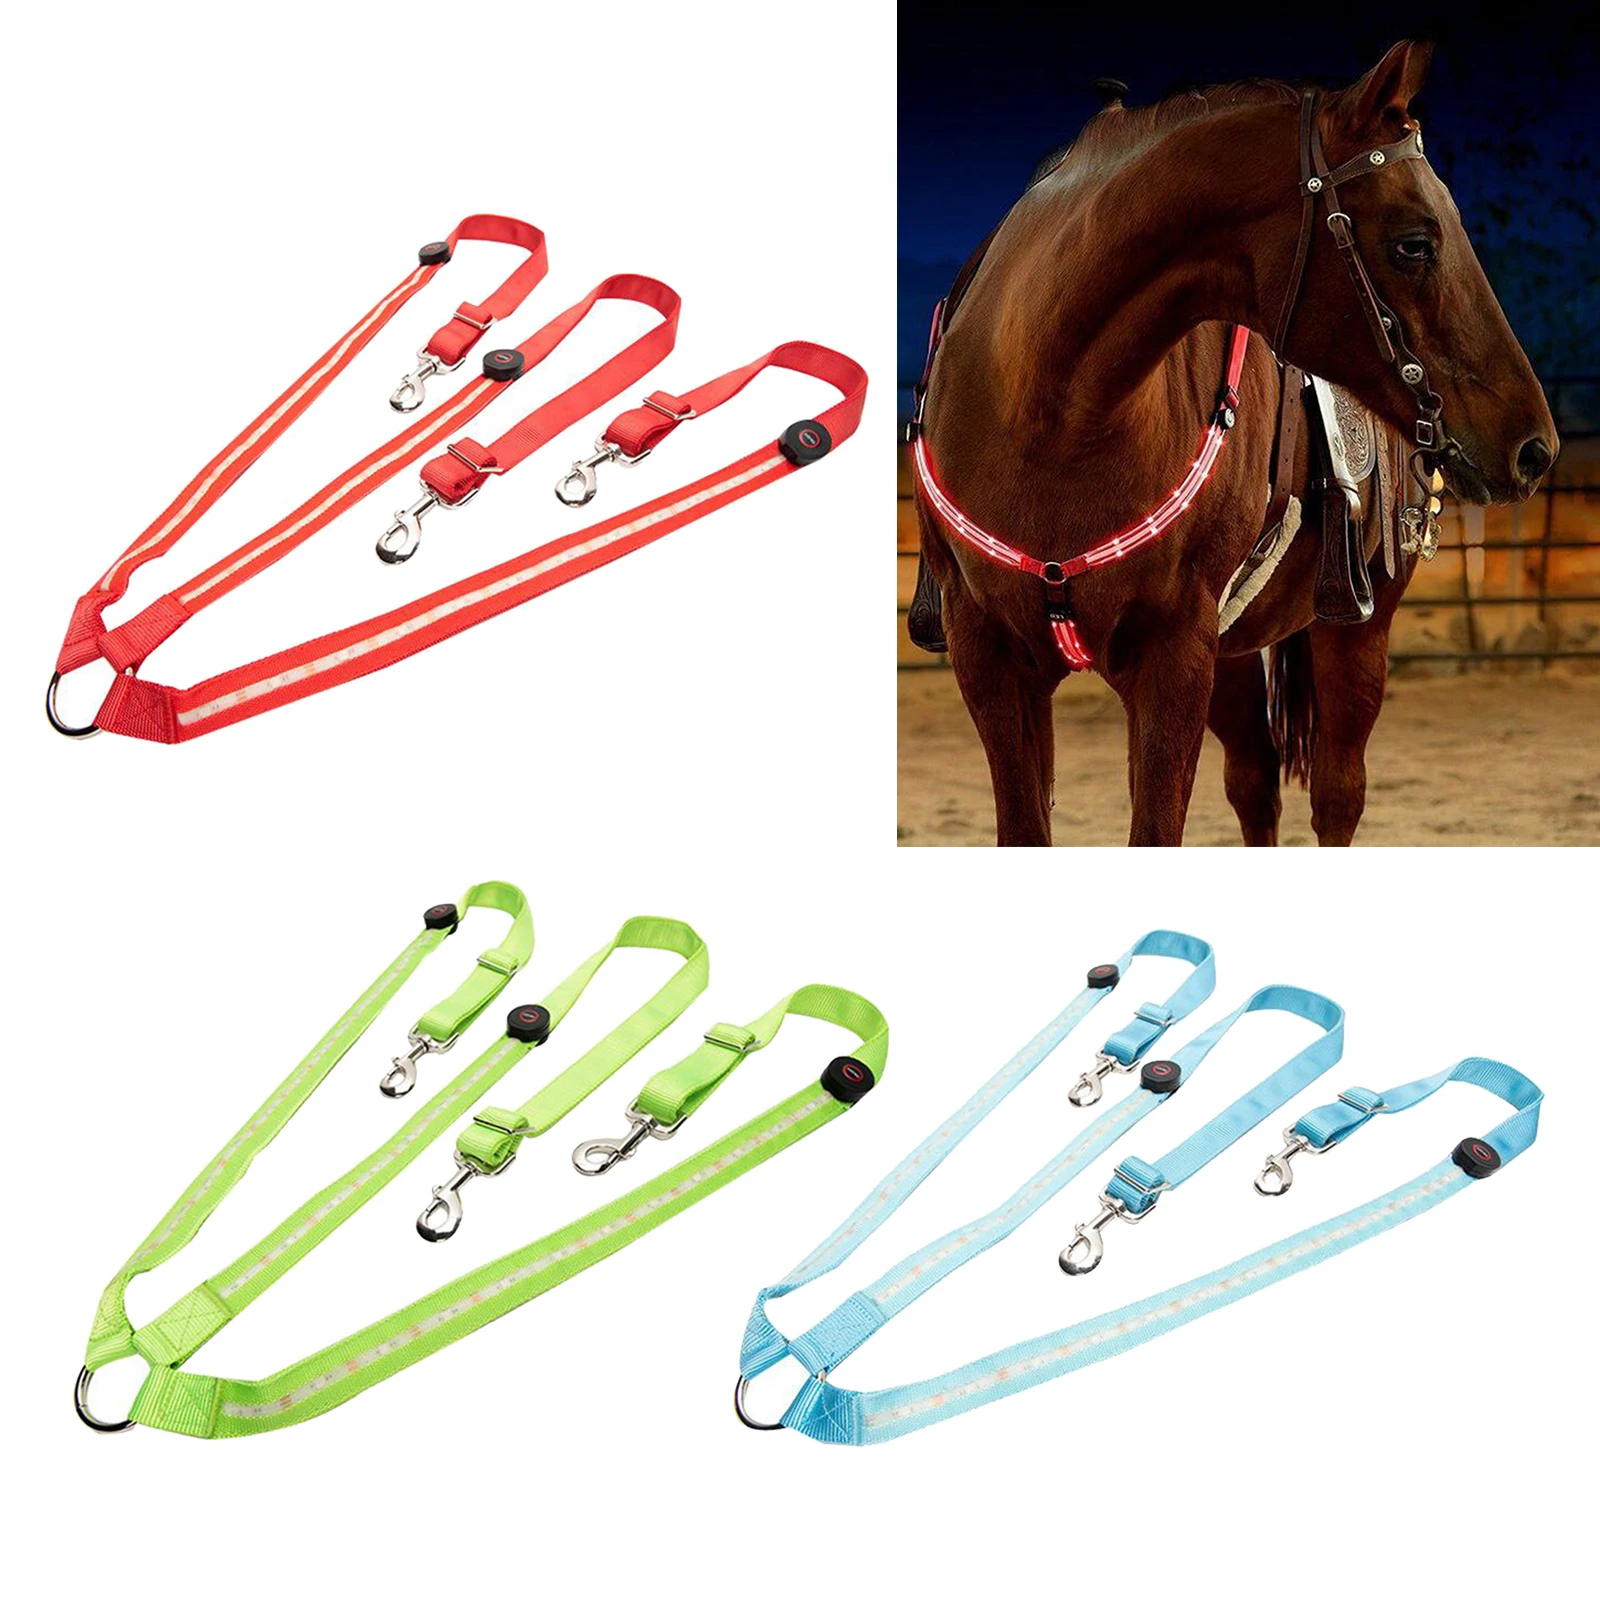 

LED Horse Harness Collar High Visibility Tack Breastplate Equestrian Safety Gear Adjustable Nylon Chest Strap Halter Bridle